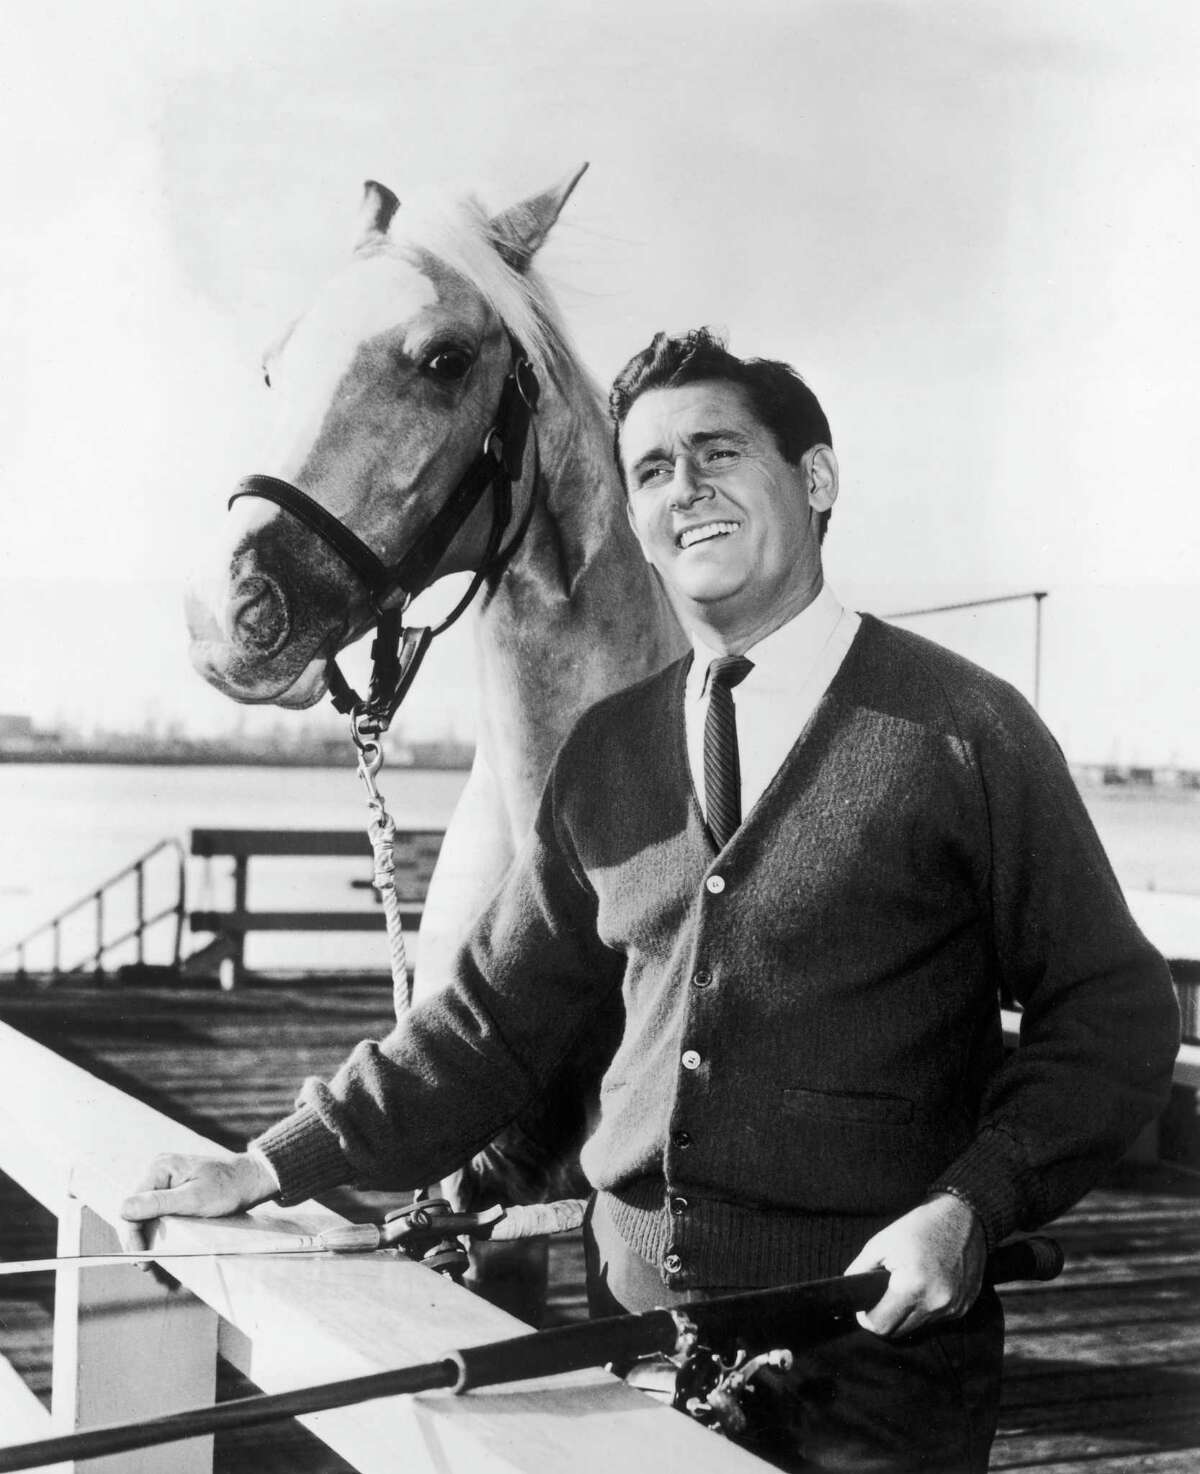 circa 1964: British-born actor Alan Young and Mr Ed, the talking horse, pose together in a promotional portrait for the television comedy series, 'Mr Ed'.